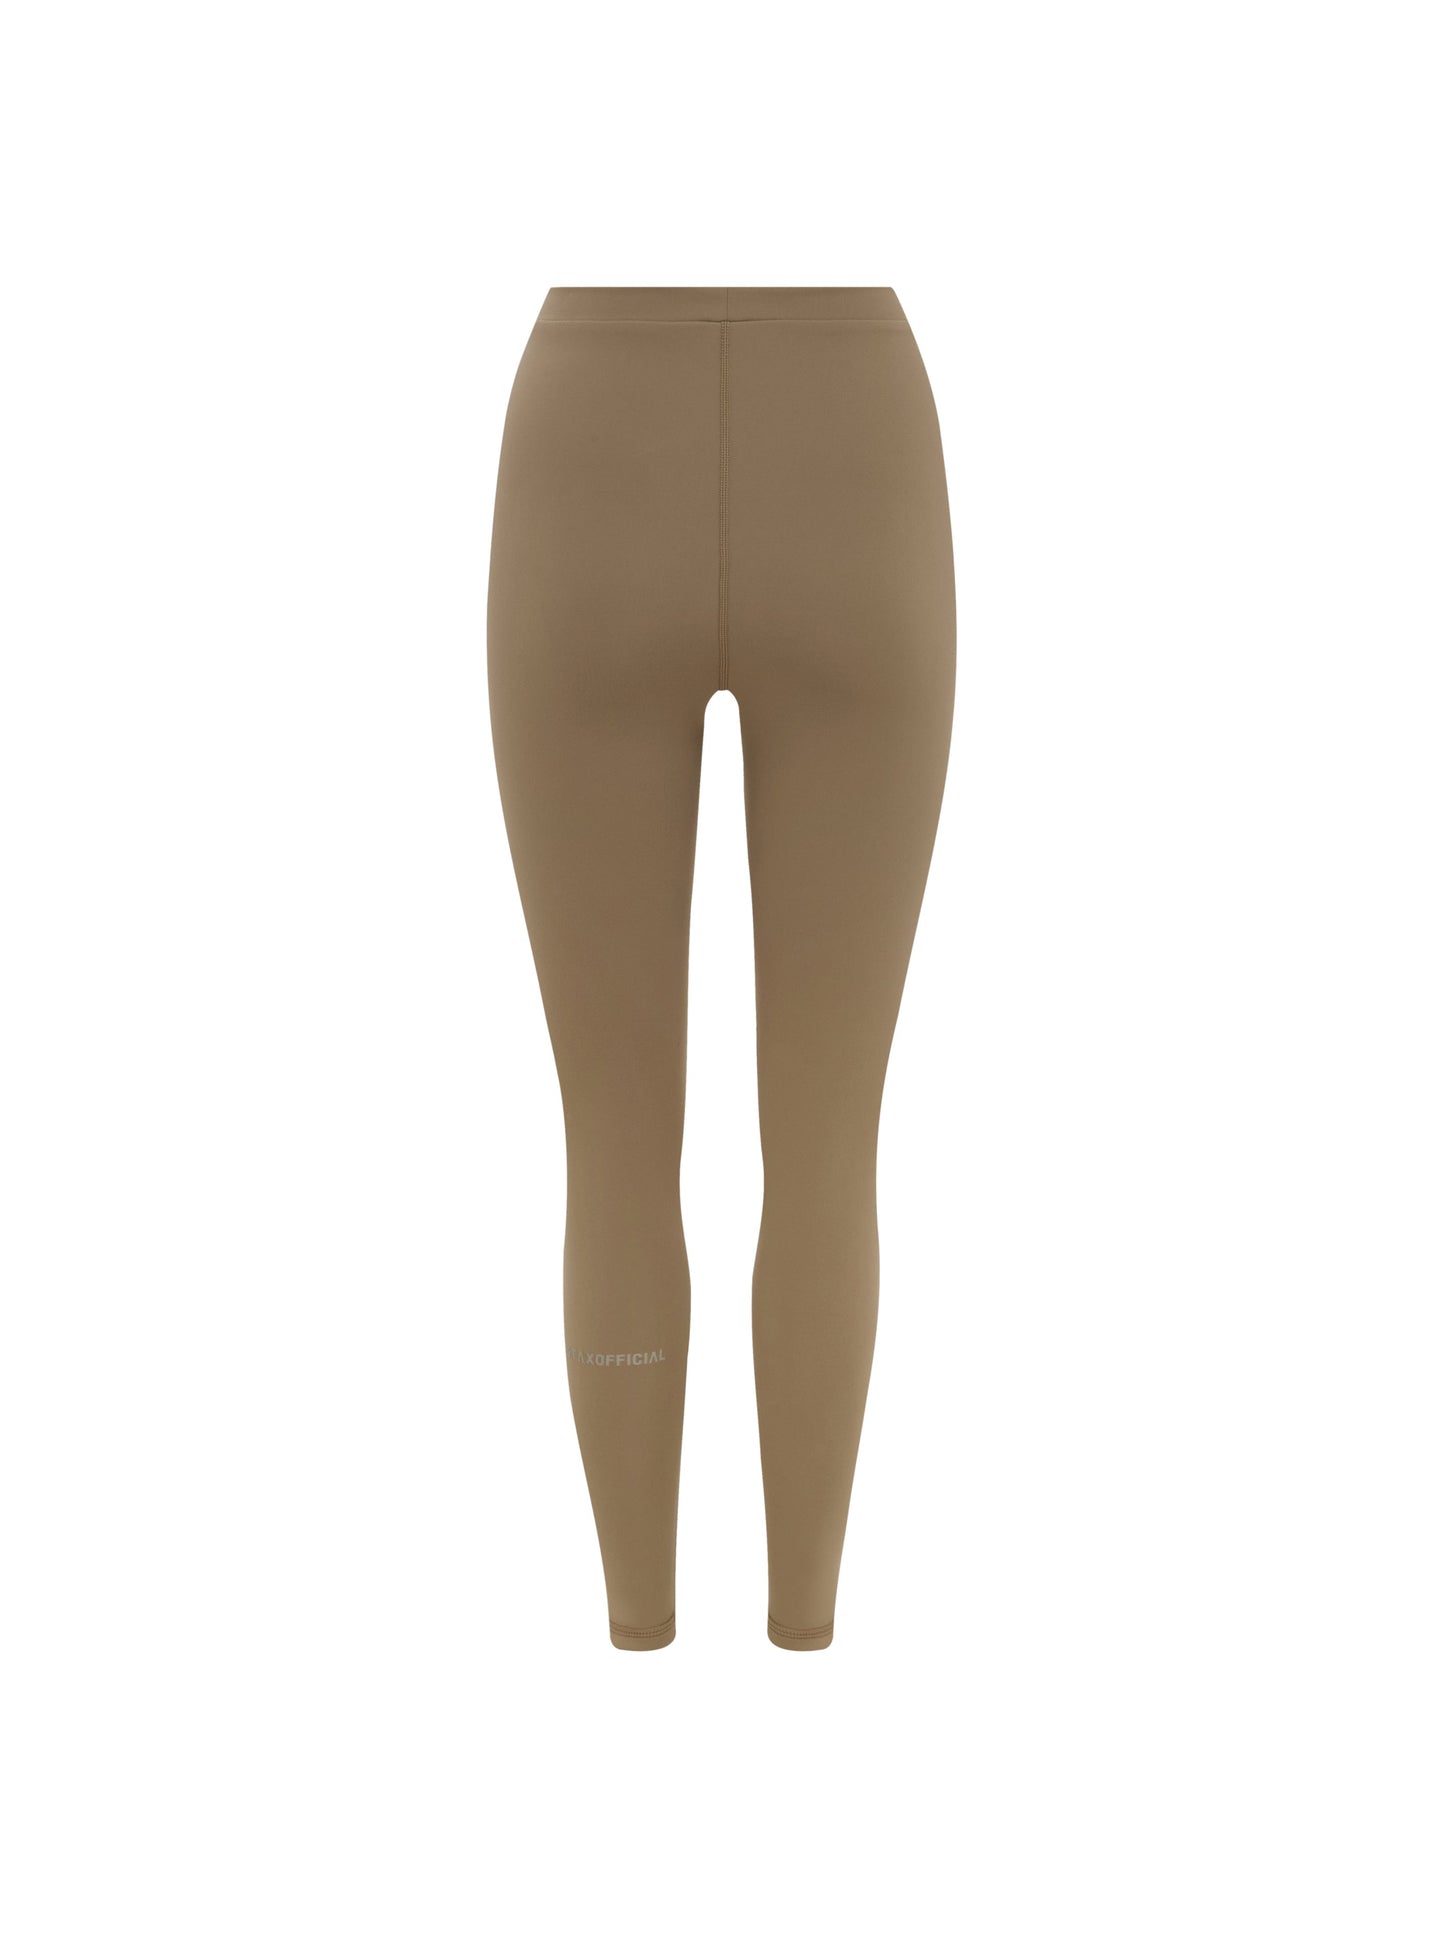 AW Poppy Full Length Tights- Tuscan (Brown)